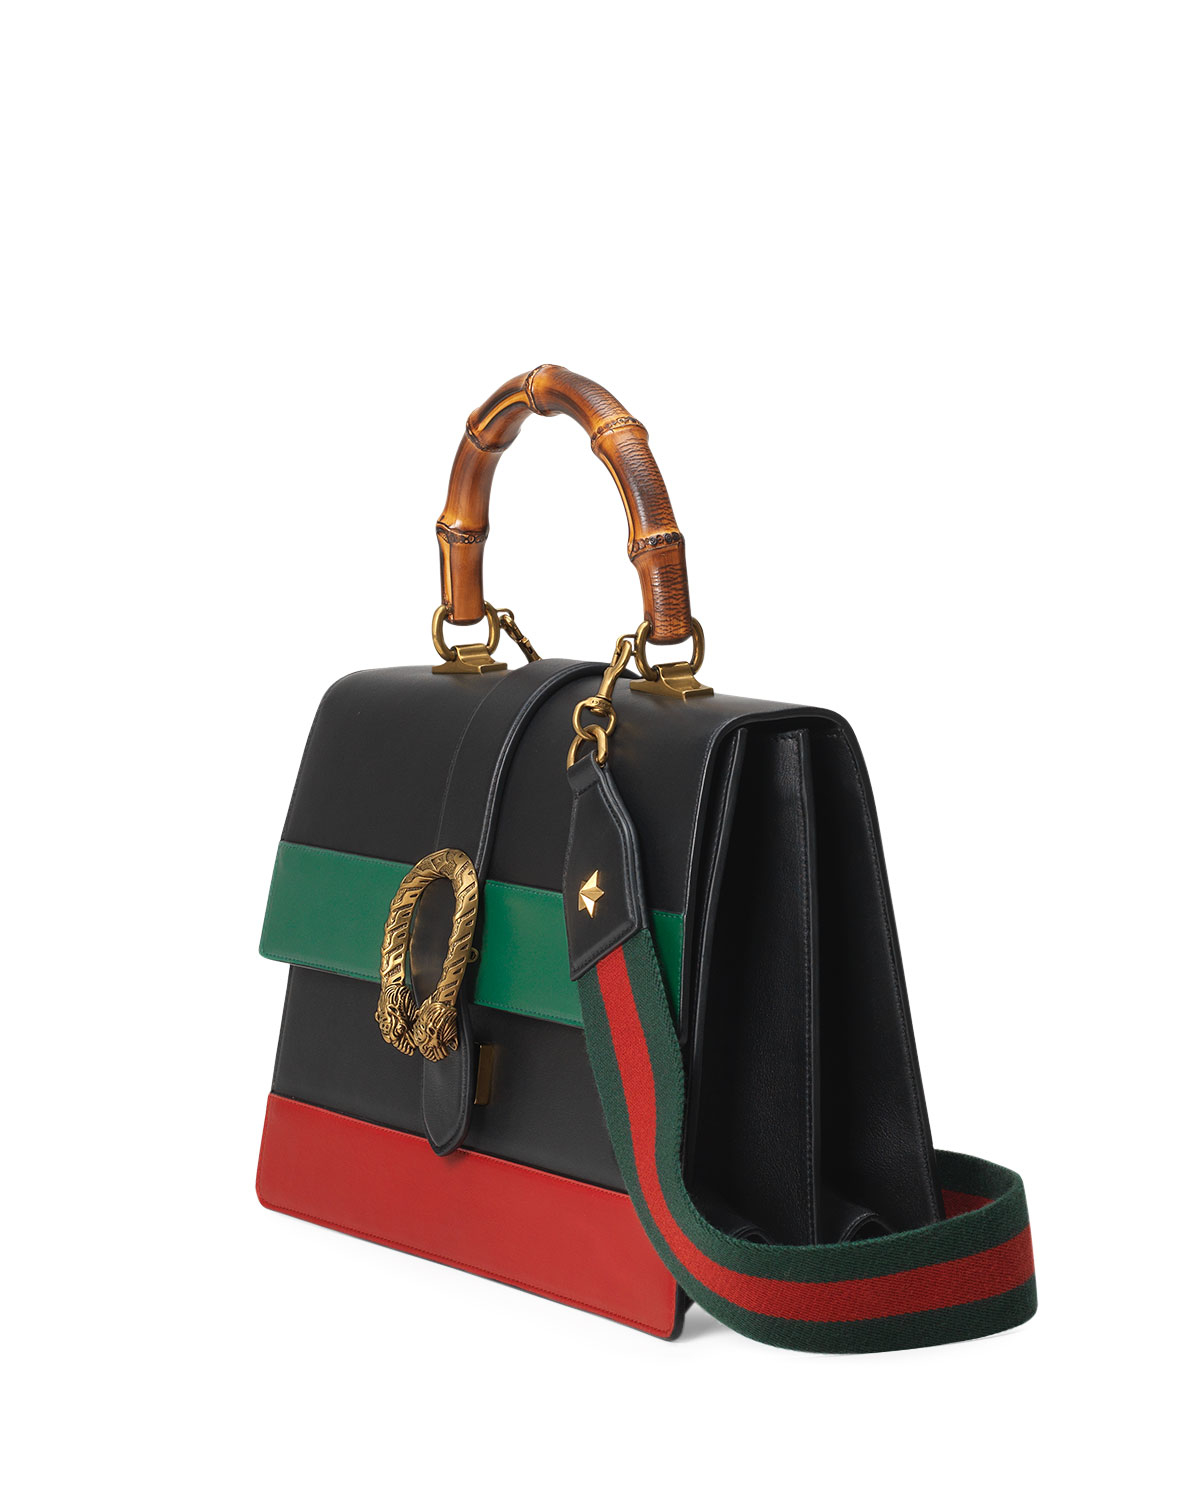 Gucci Leather Dionysus Striped Bamboo Top-Handle Bag in Black - Lyst